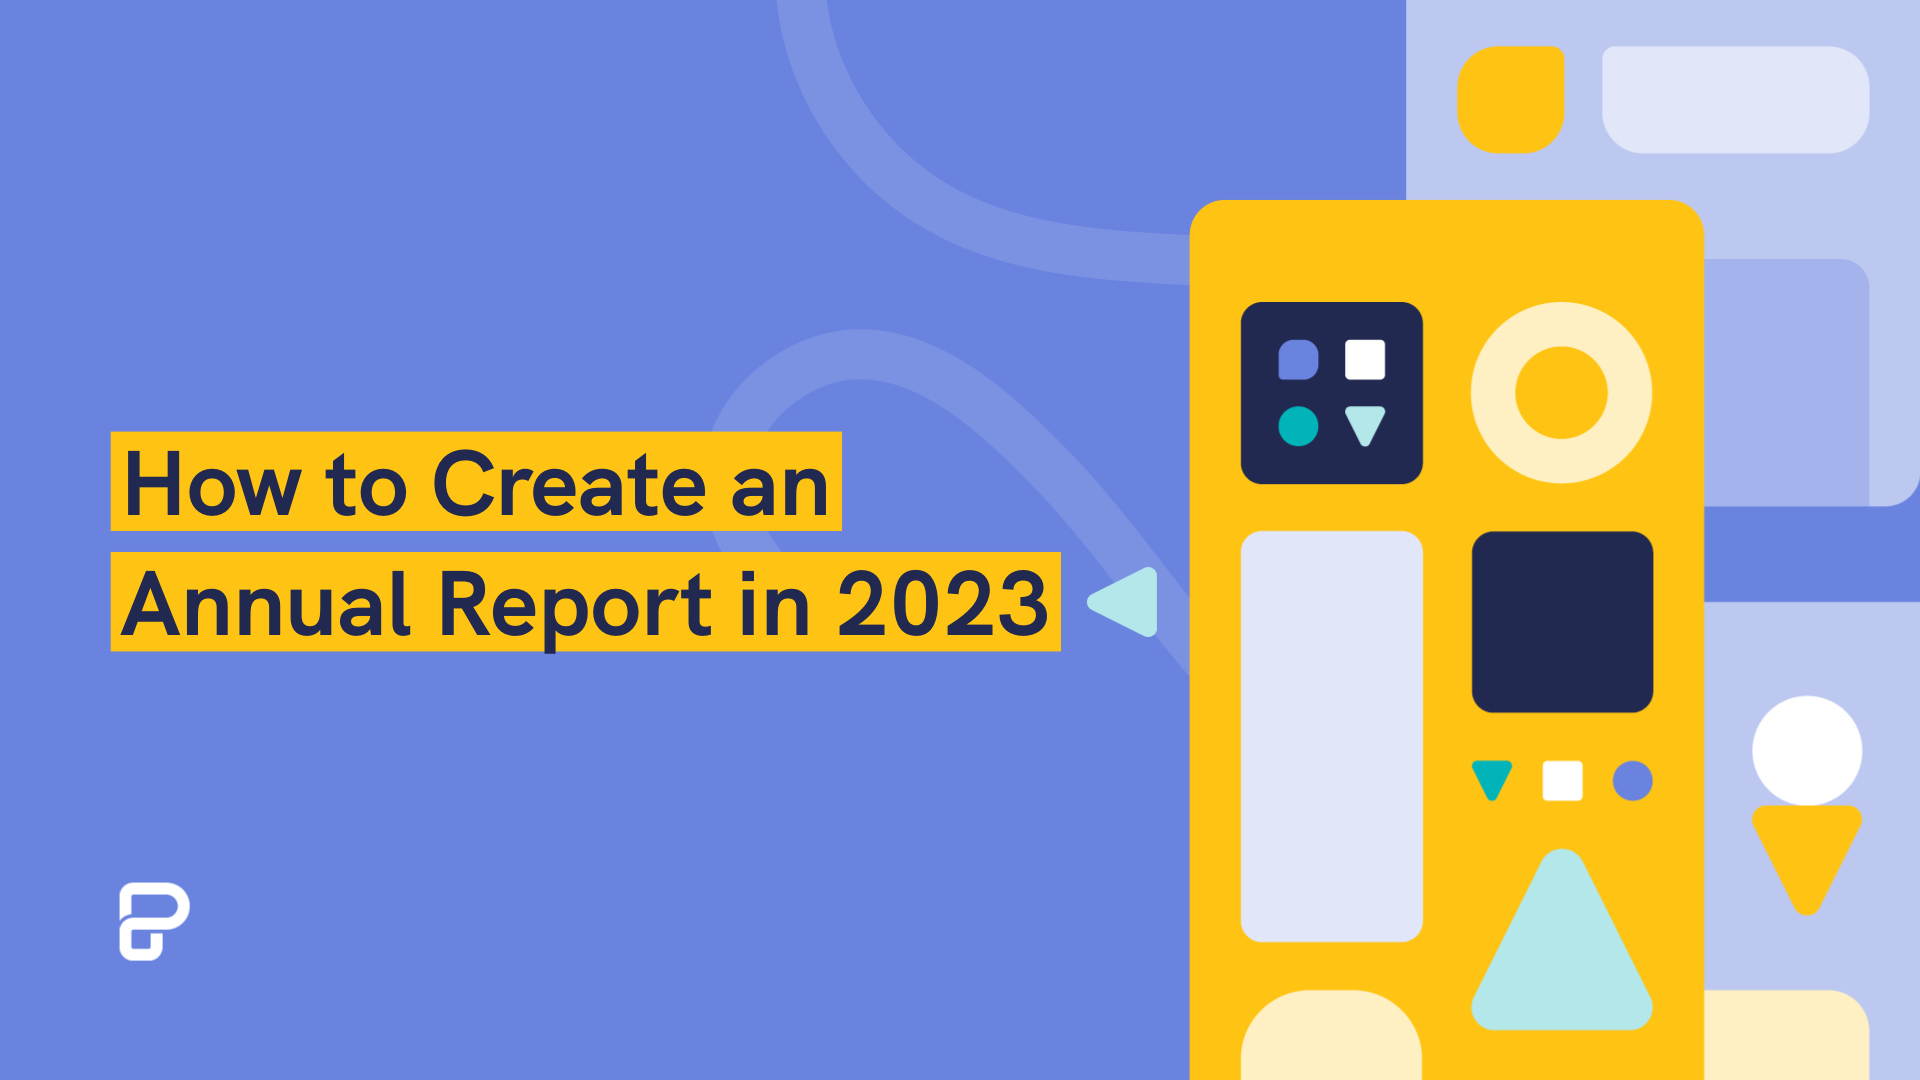 piktochart how to create an annual report in 2023